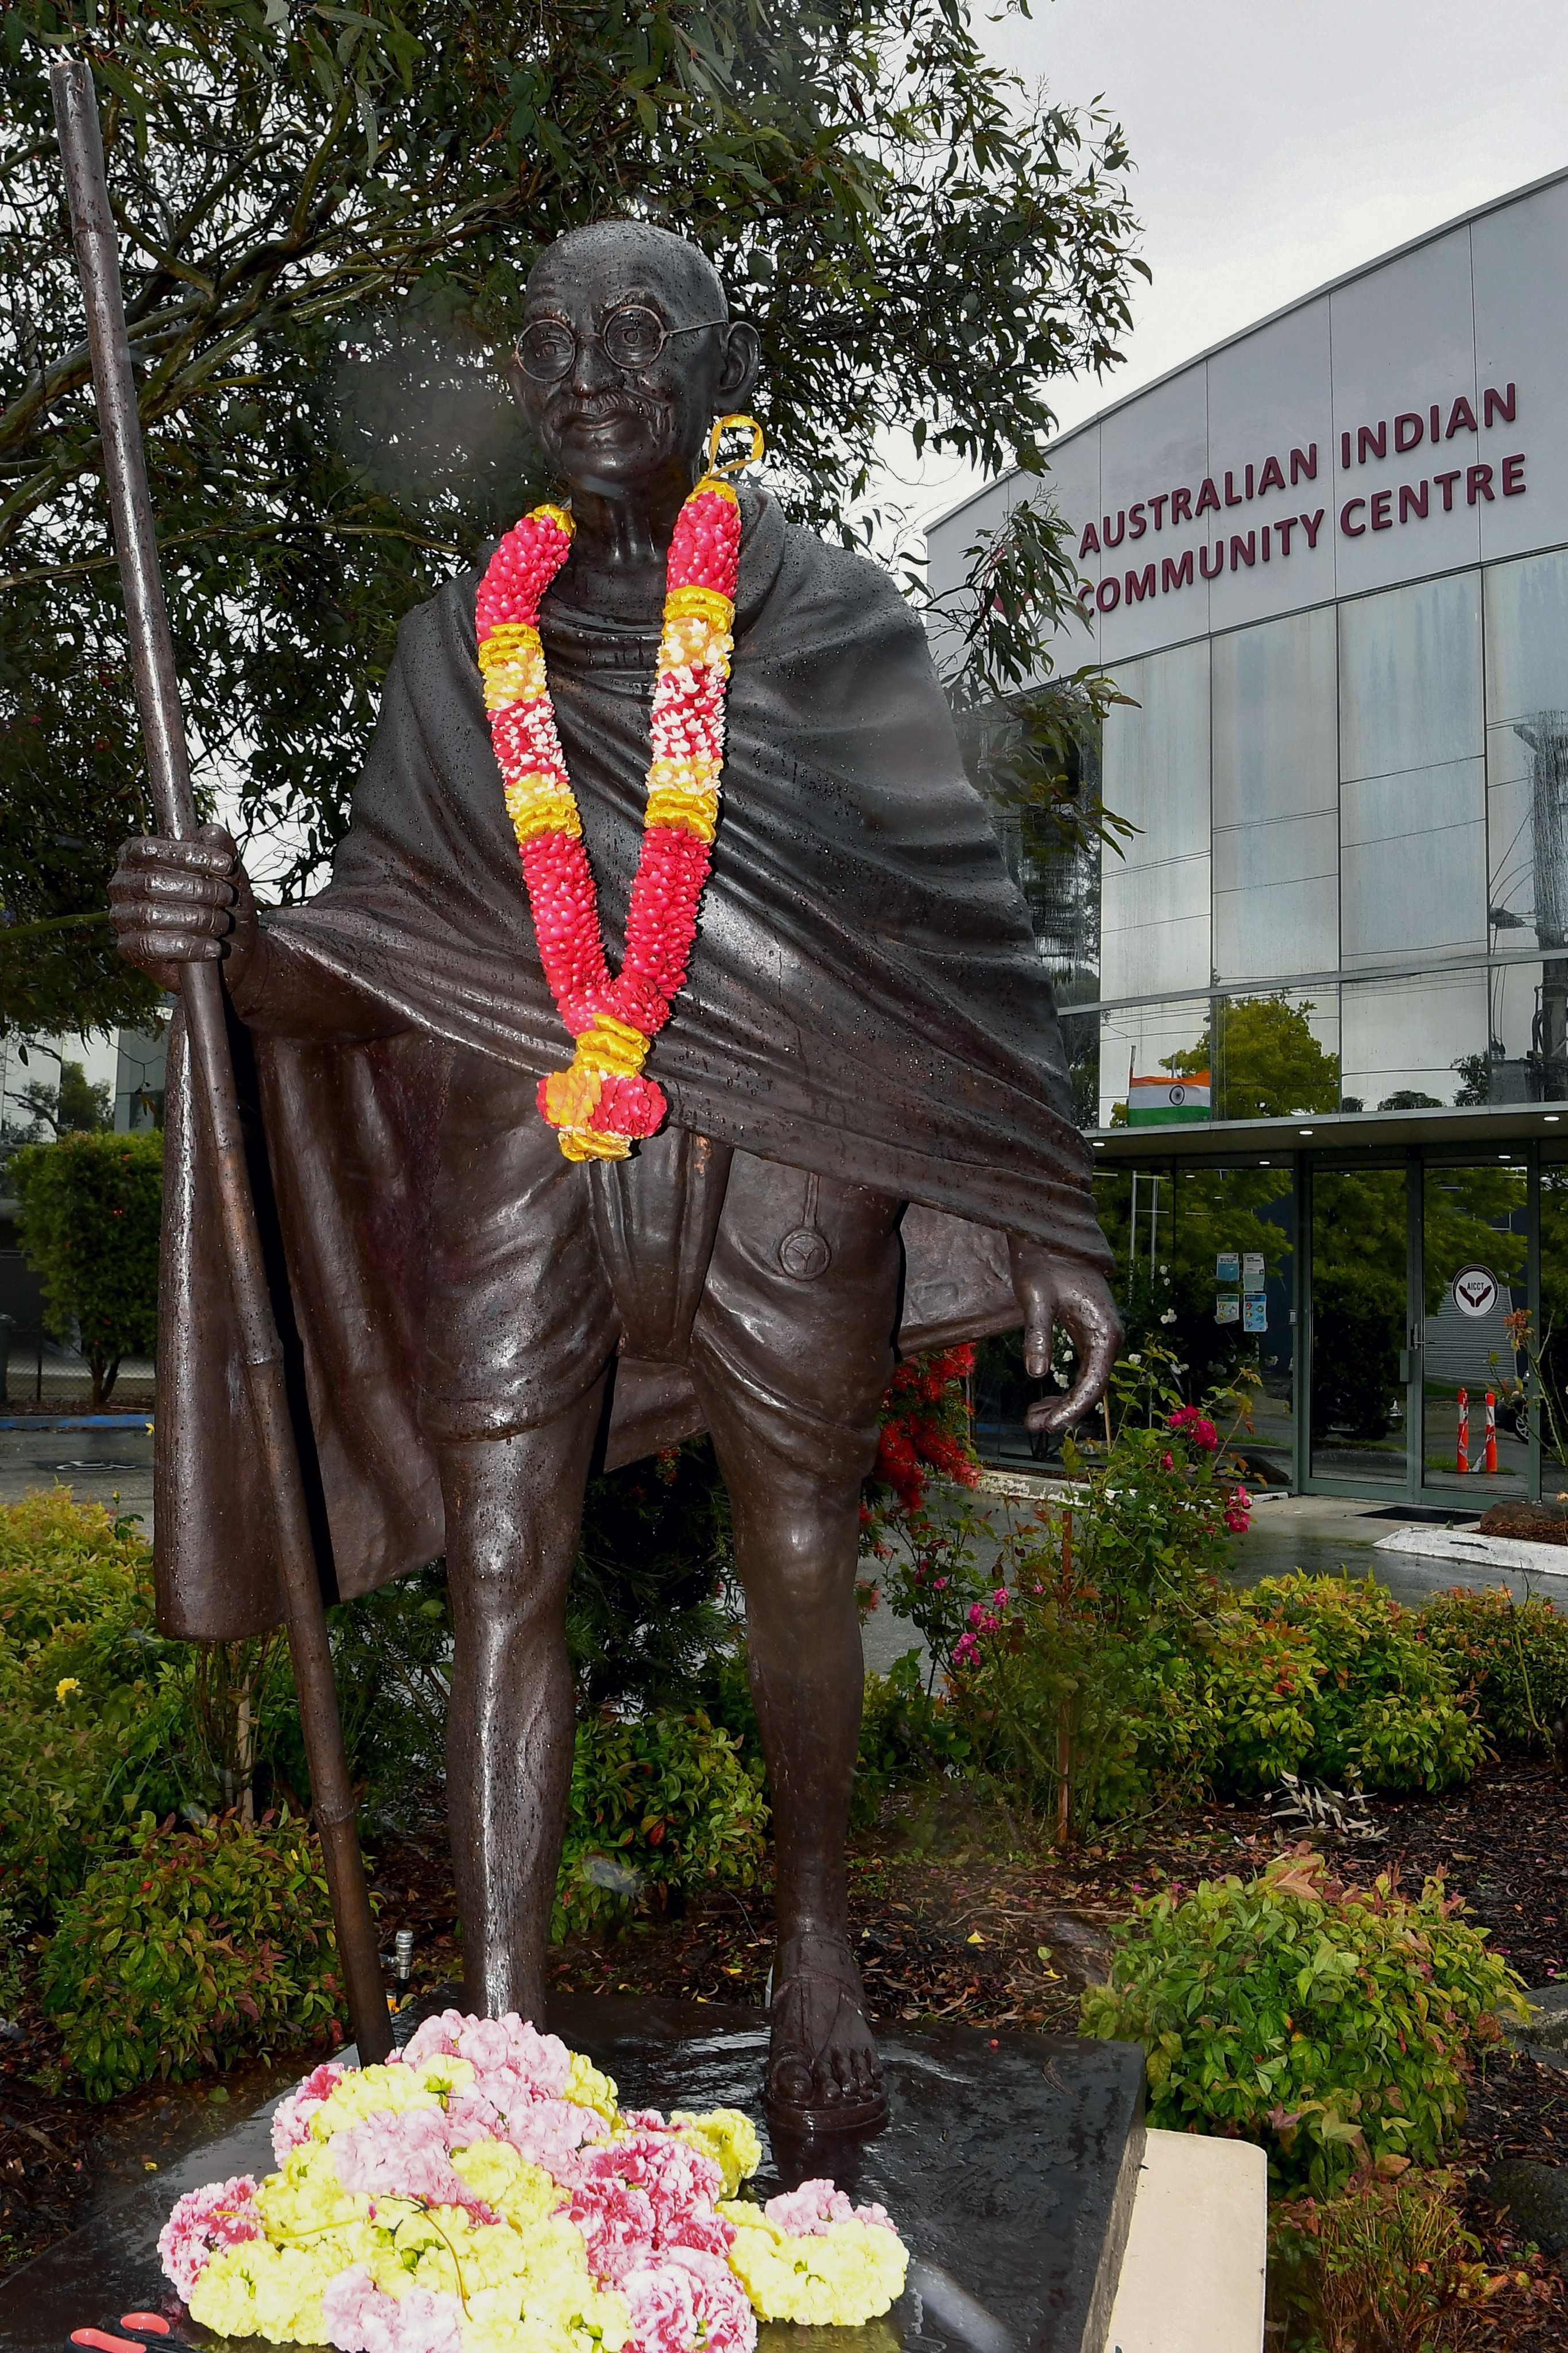 Gandhi statue in Melbourne was vandalised hours after being unveiled by Prime Minister Scott Morrison